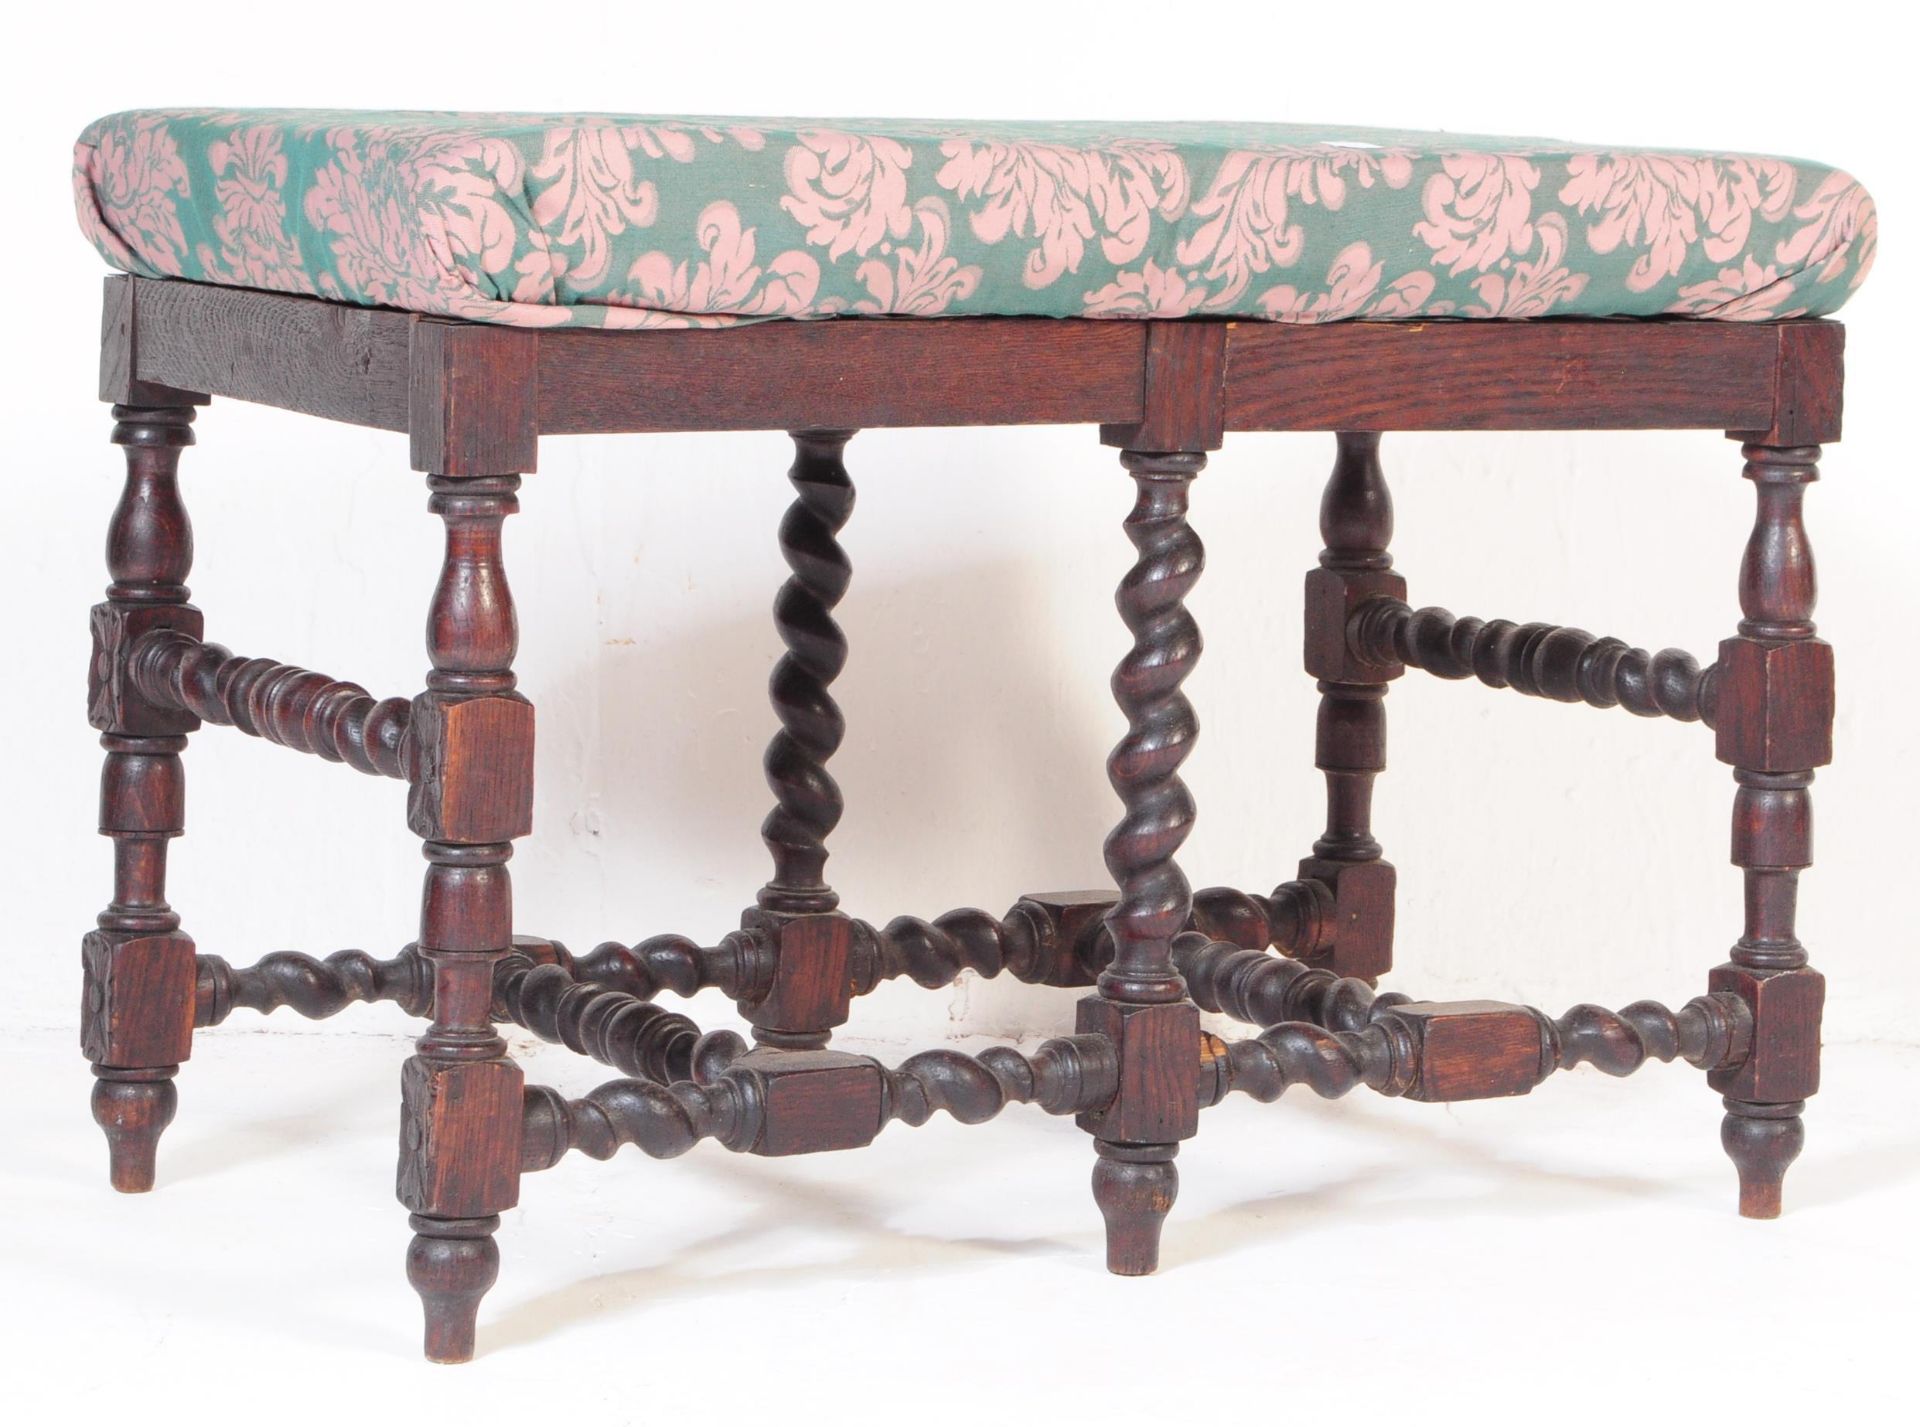 VICTORIAN 19TH CENTURY DOUBLE SEATED PIANO STOOL